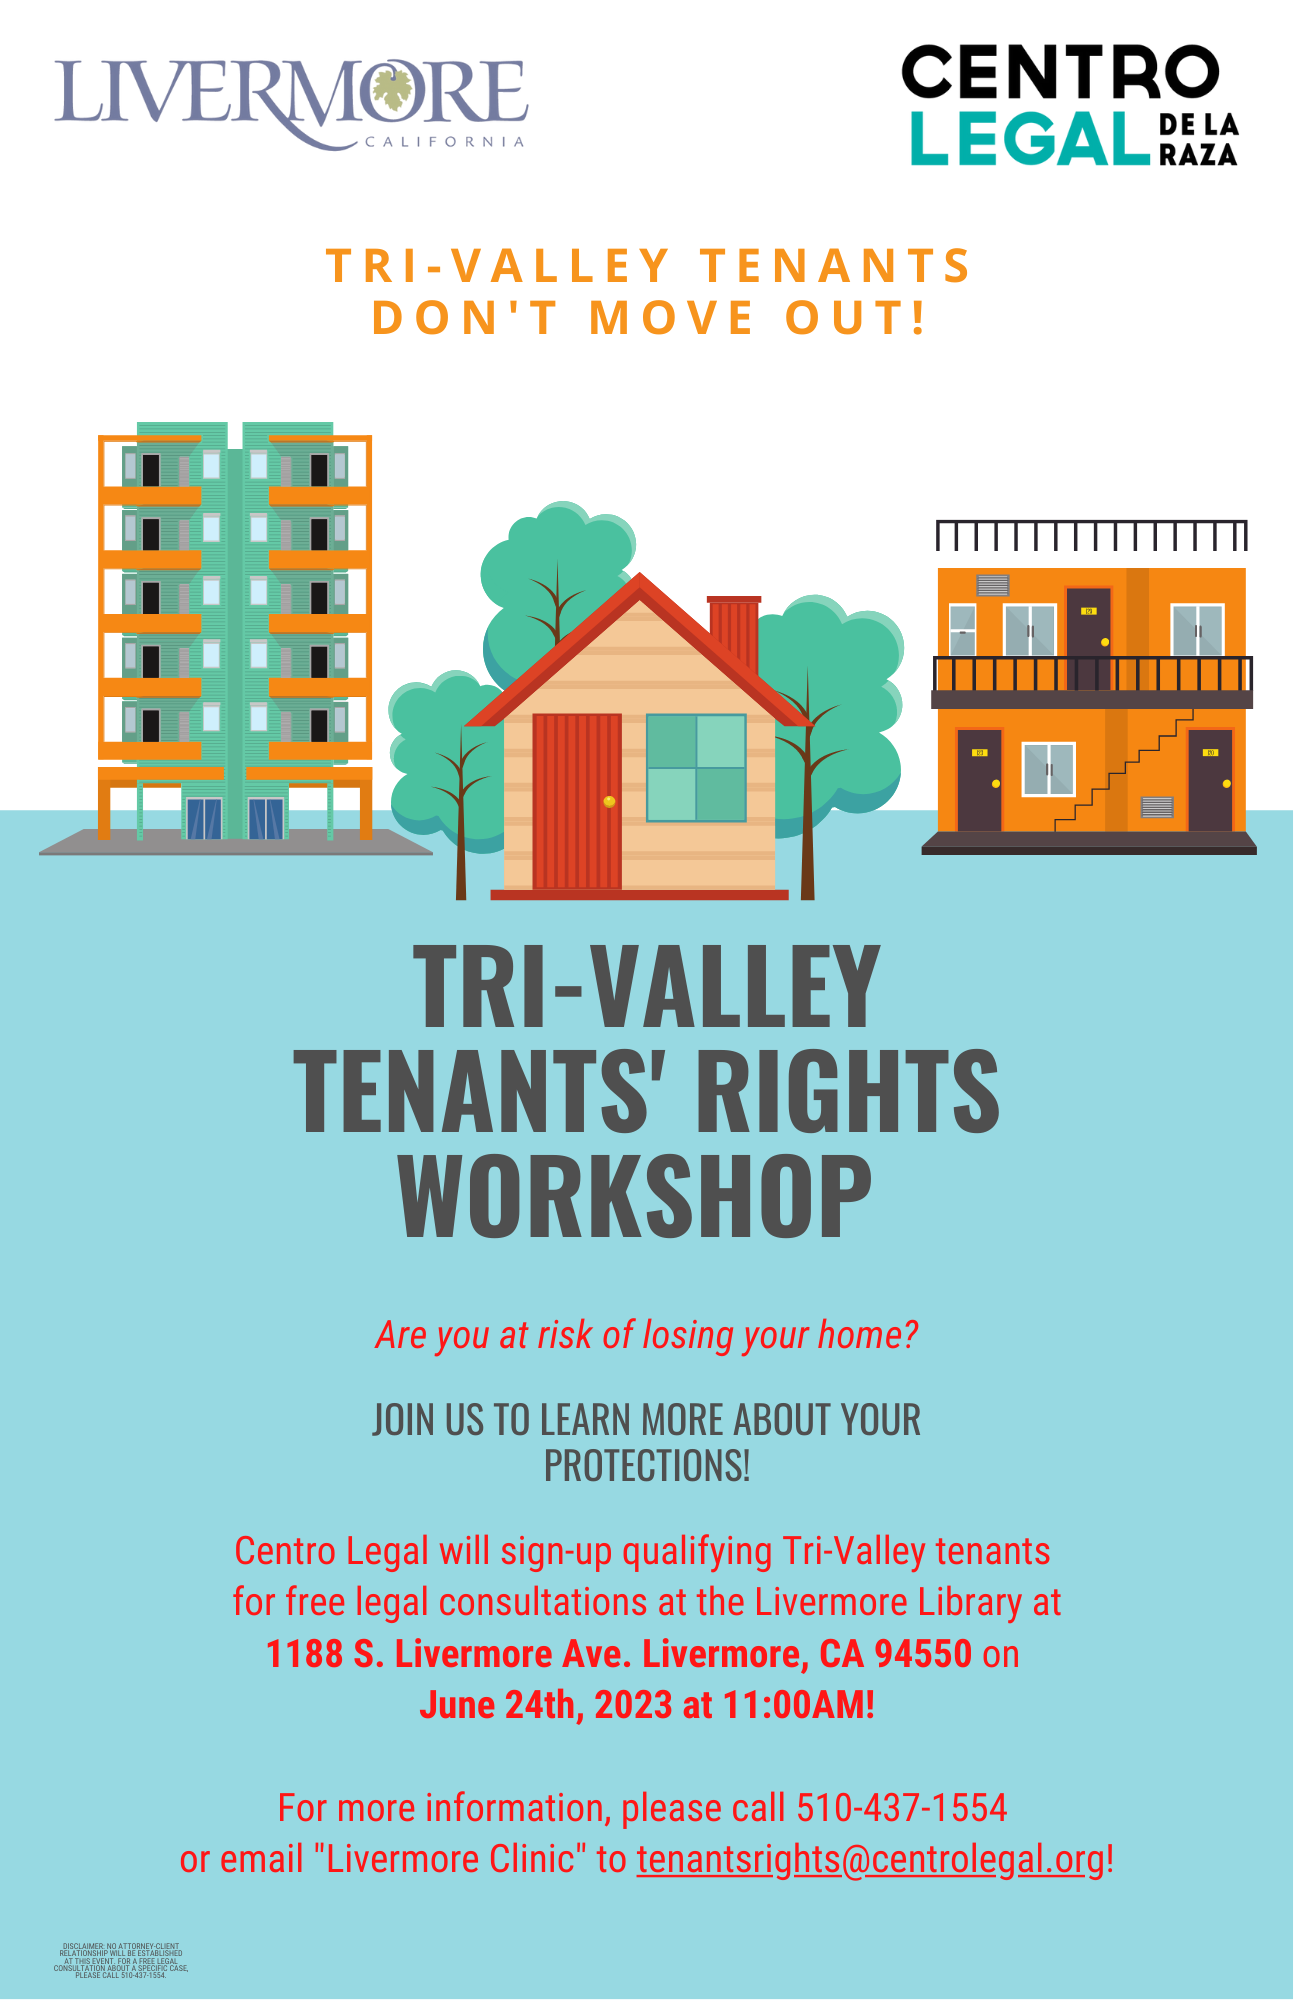 Centro Legal, Livermore June 24th Tenants' Rights Workshop Flyer (ENG)